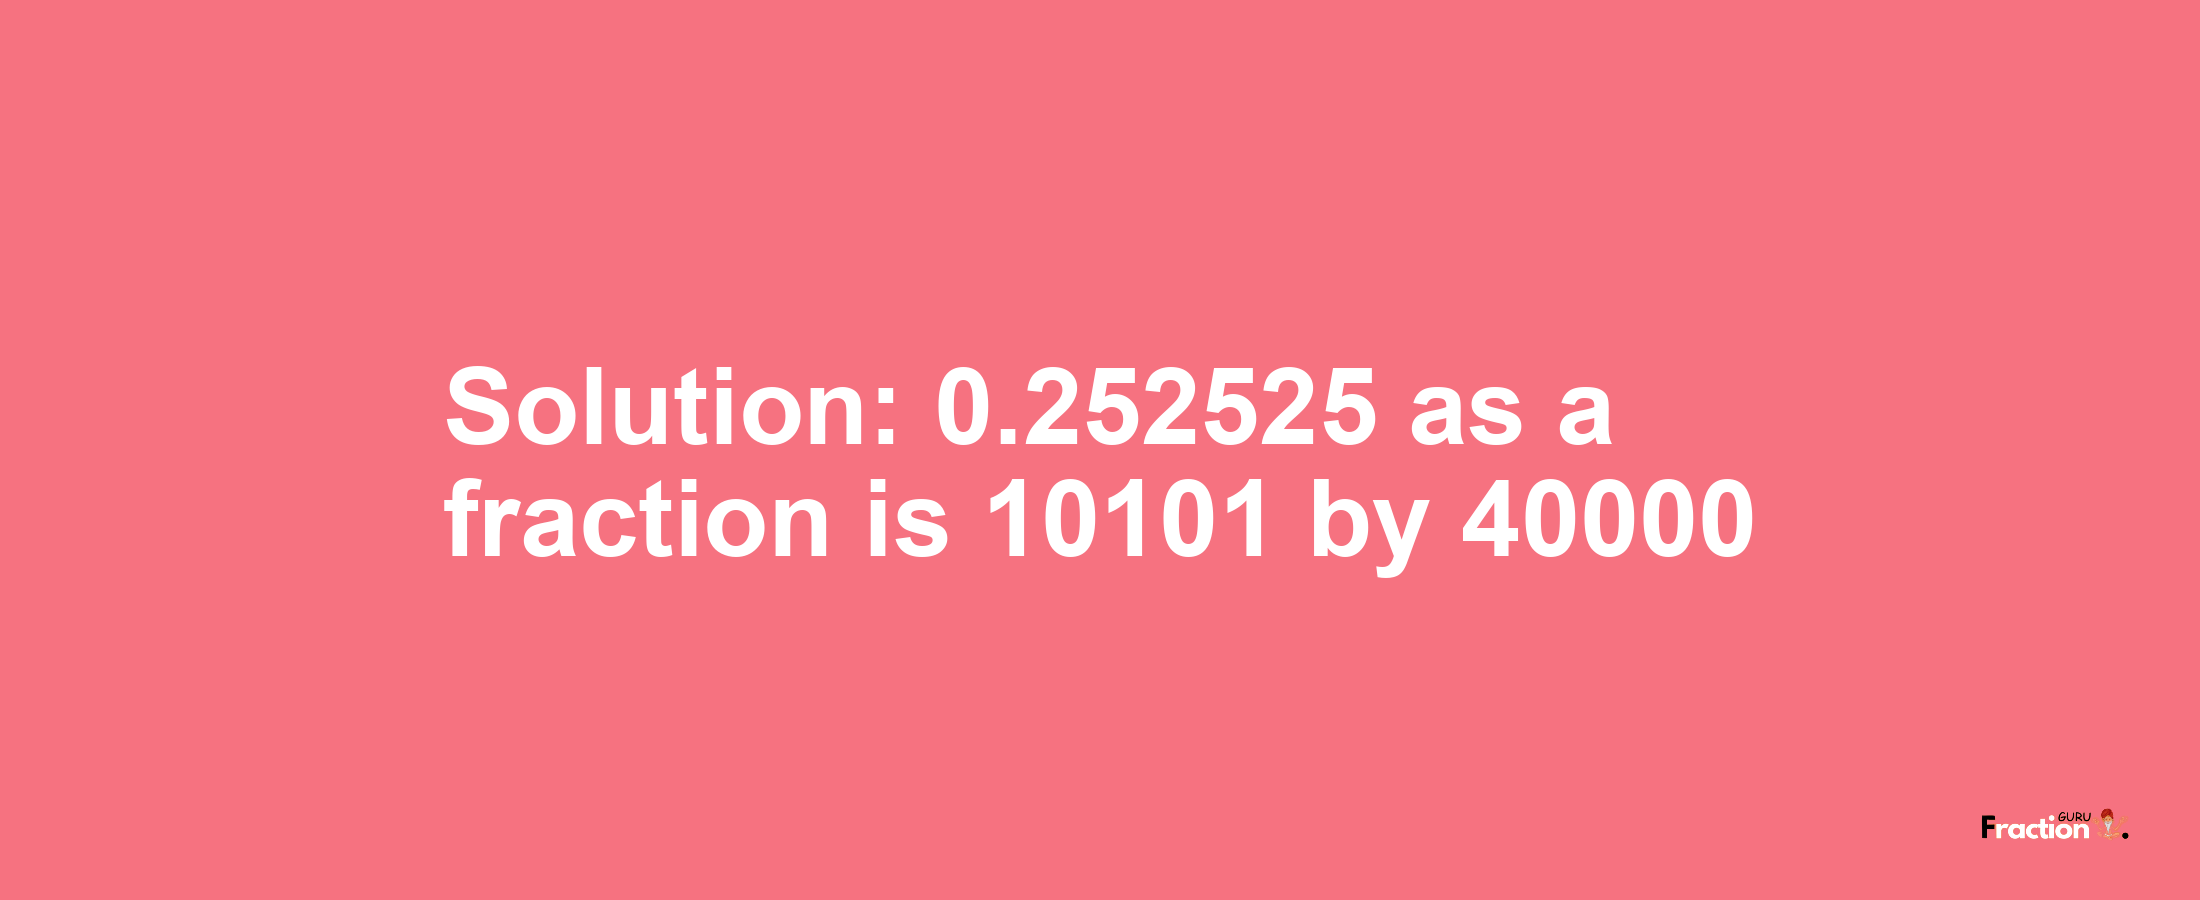 Solution:0.252525 as a fraction is 10101/40000